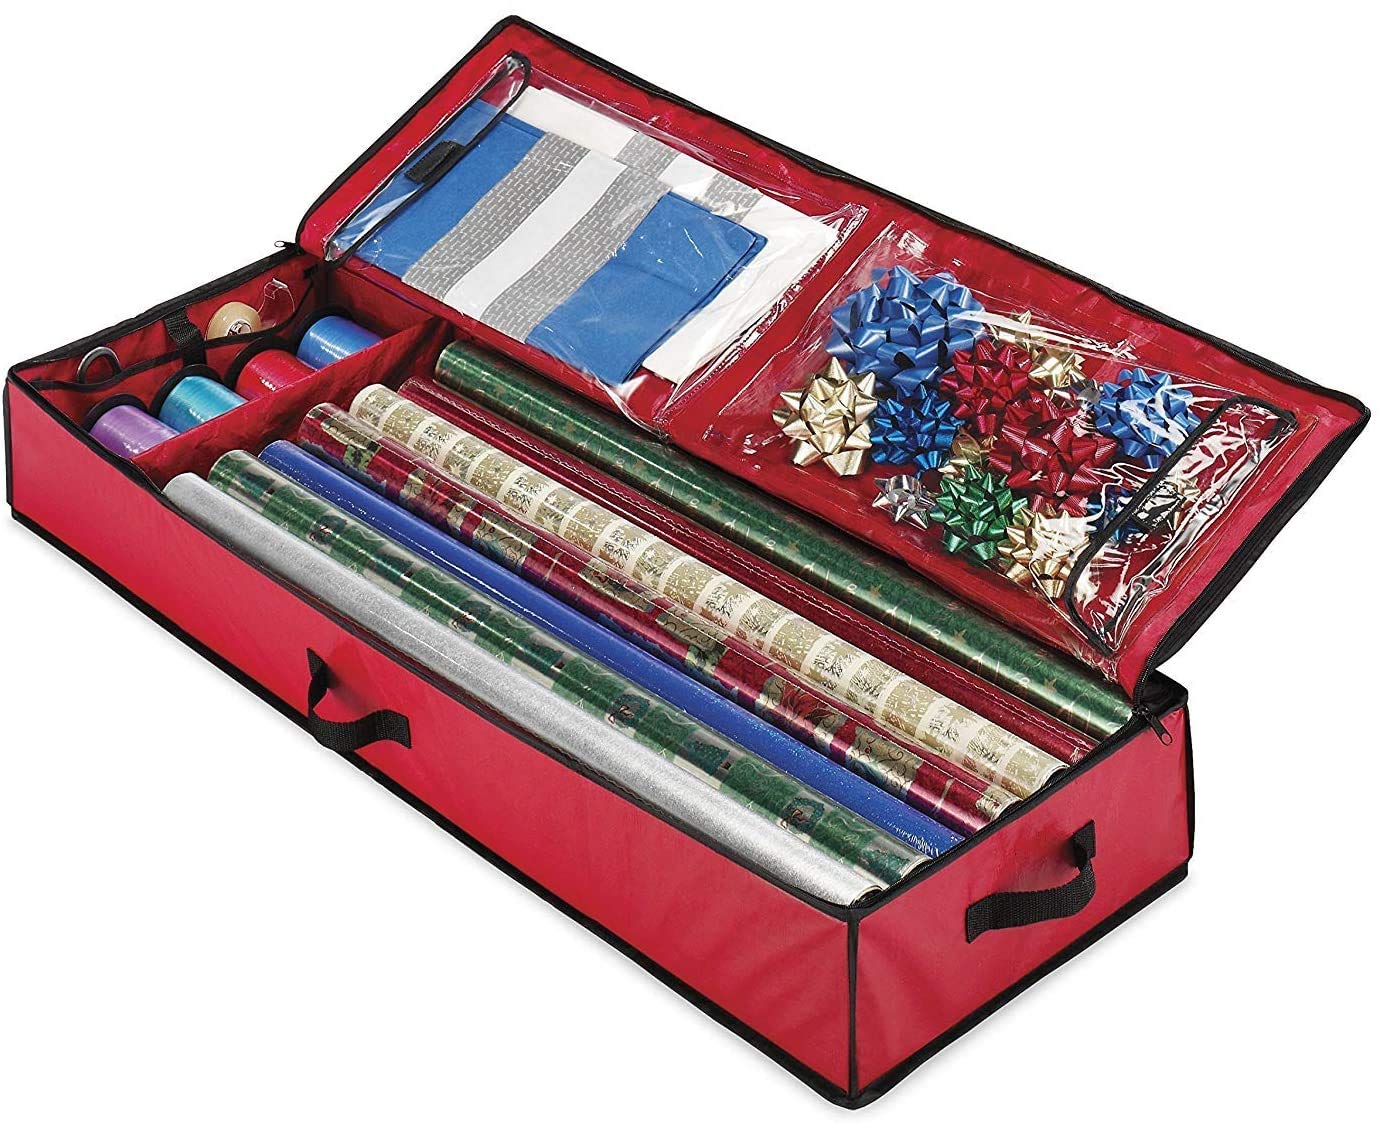 Christmas Storage Organizer � Spacious Under-bed Holiday Wrapping Paper Container �Perfect for Gift Wrap, Bags, Ribbons, Bows, Cards, Wrapping Supplies and Many More  - Like New